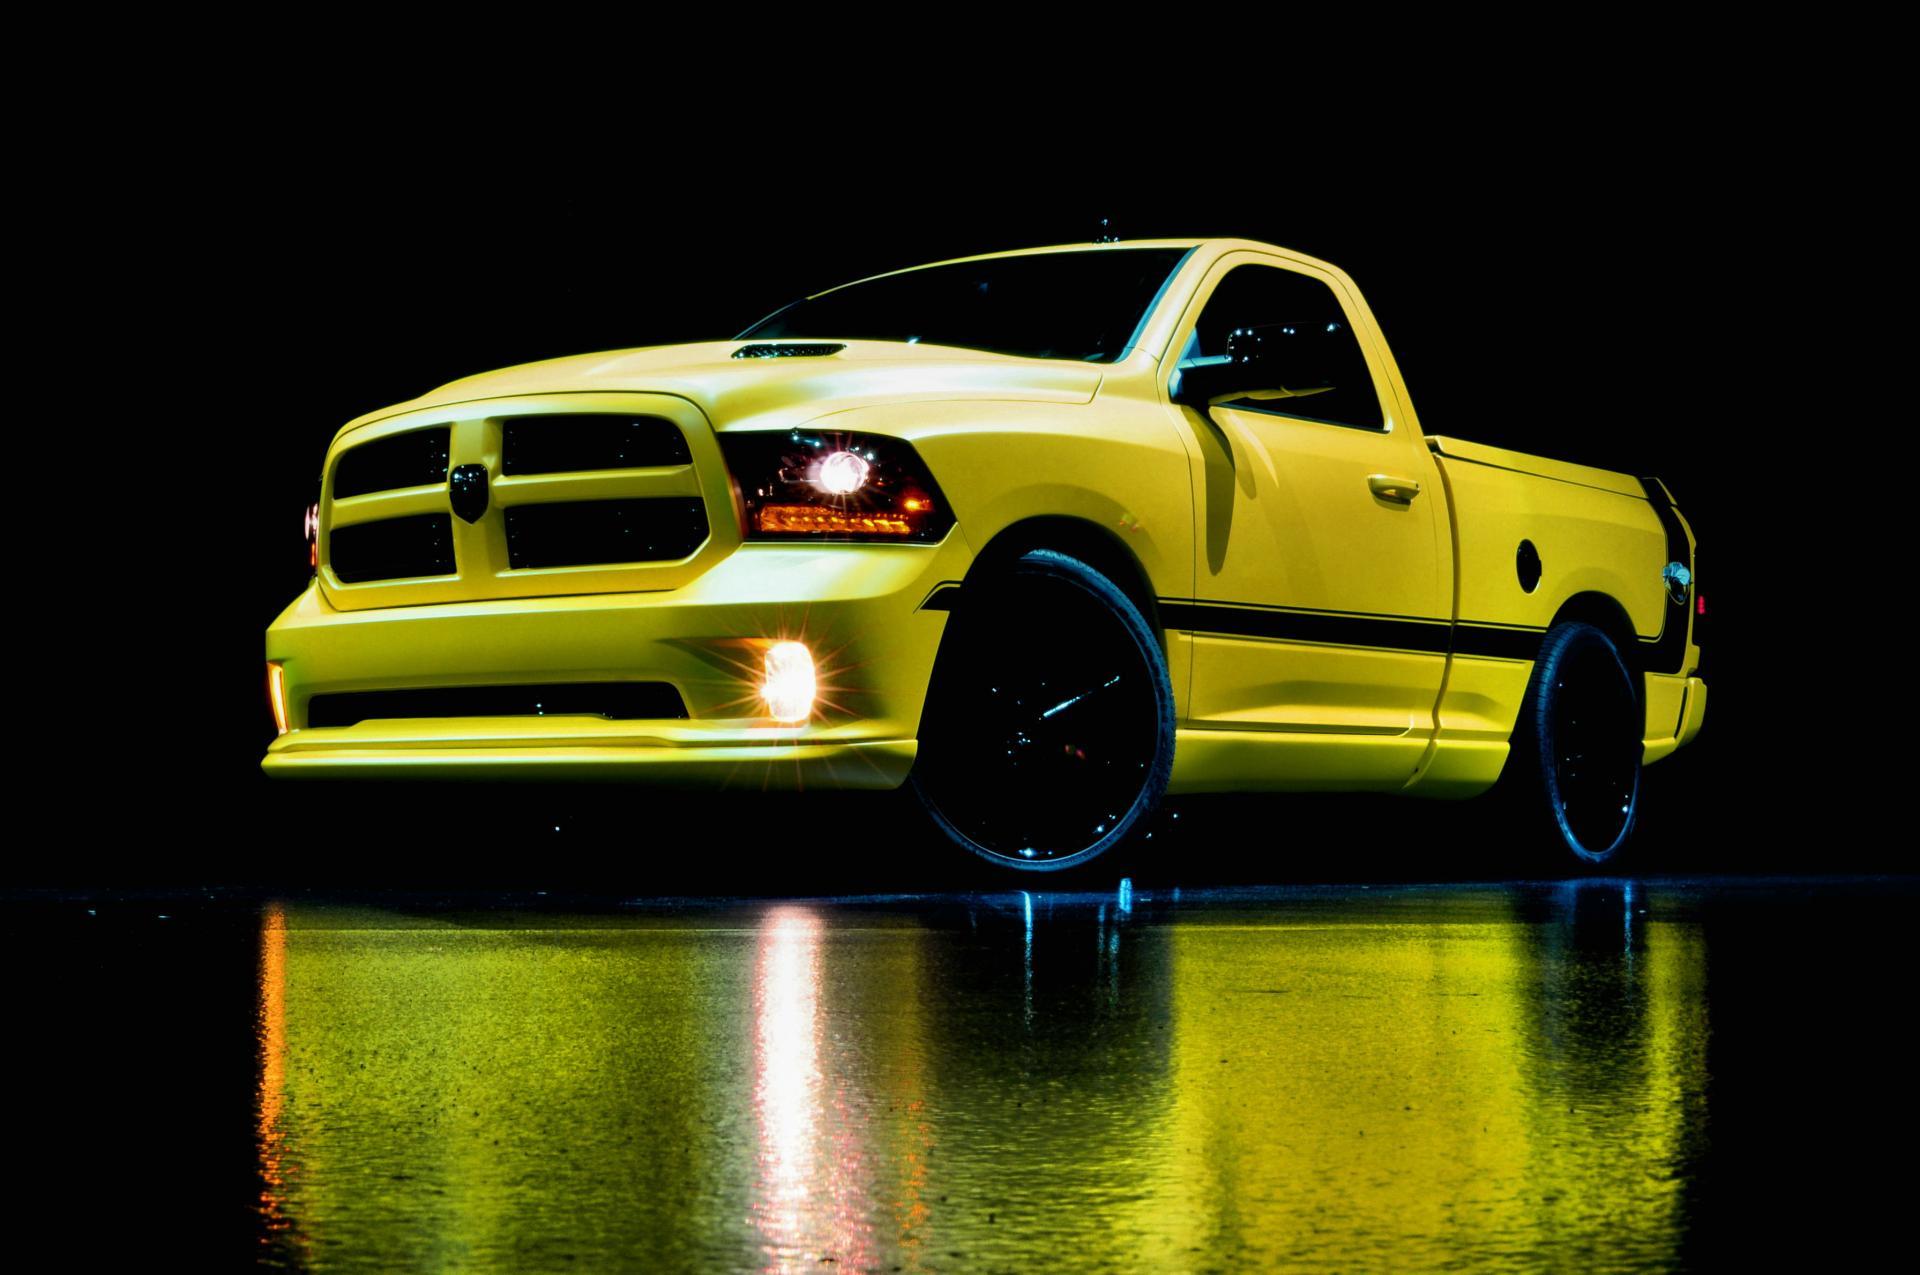 Ram 1500 Rumble Bee Concept News and Information, Research